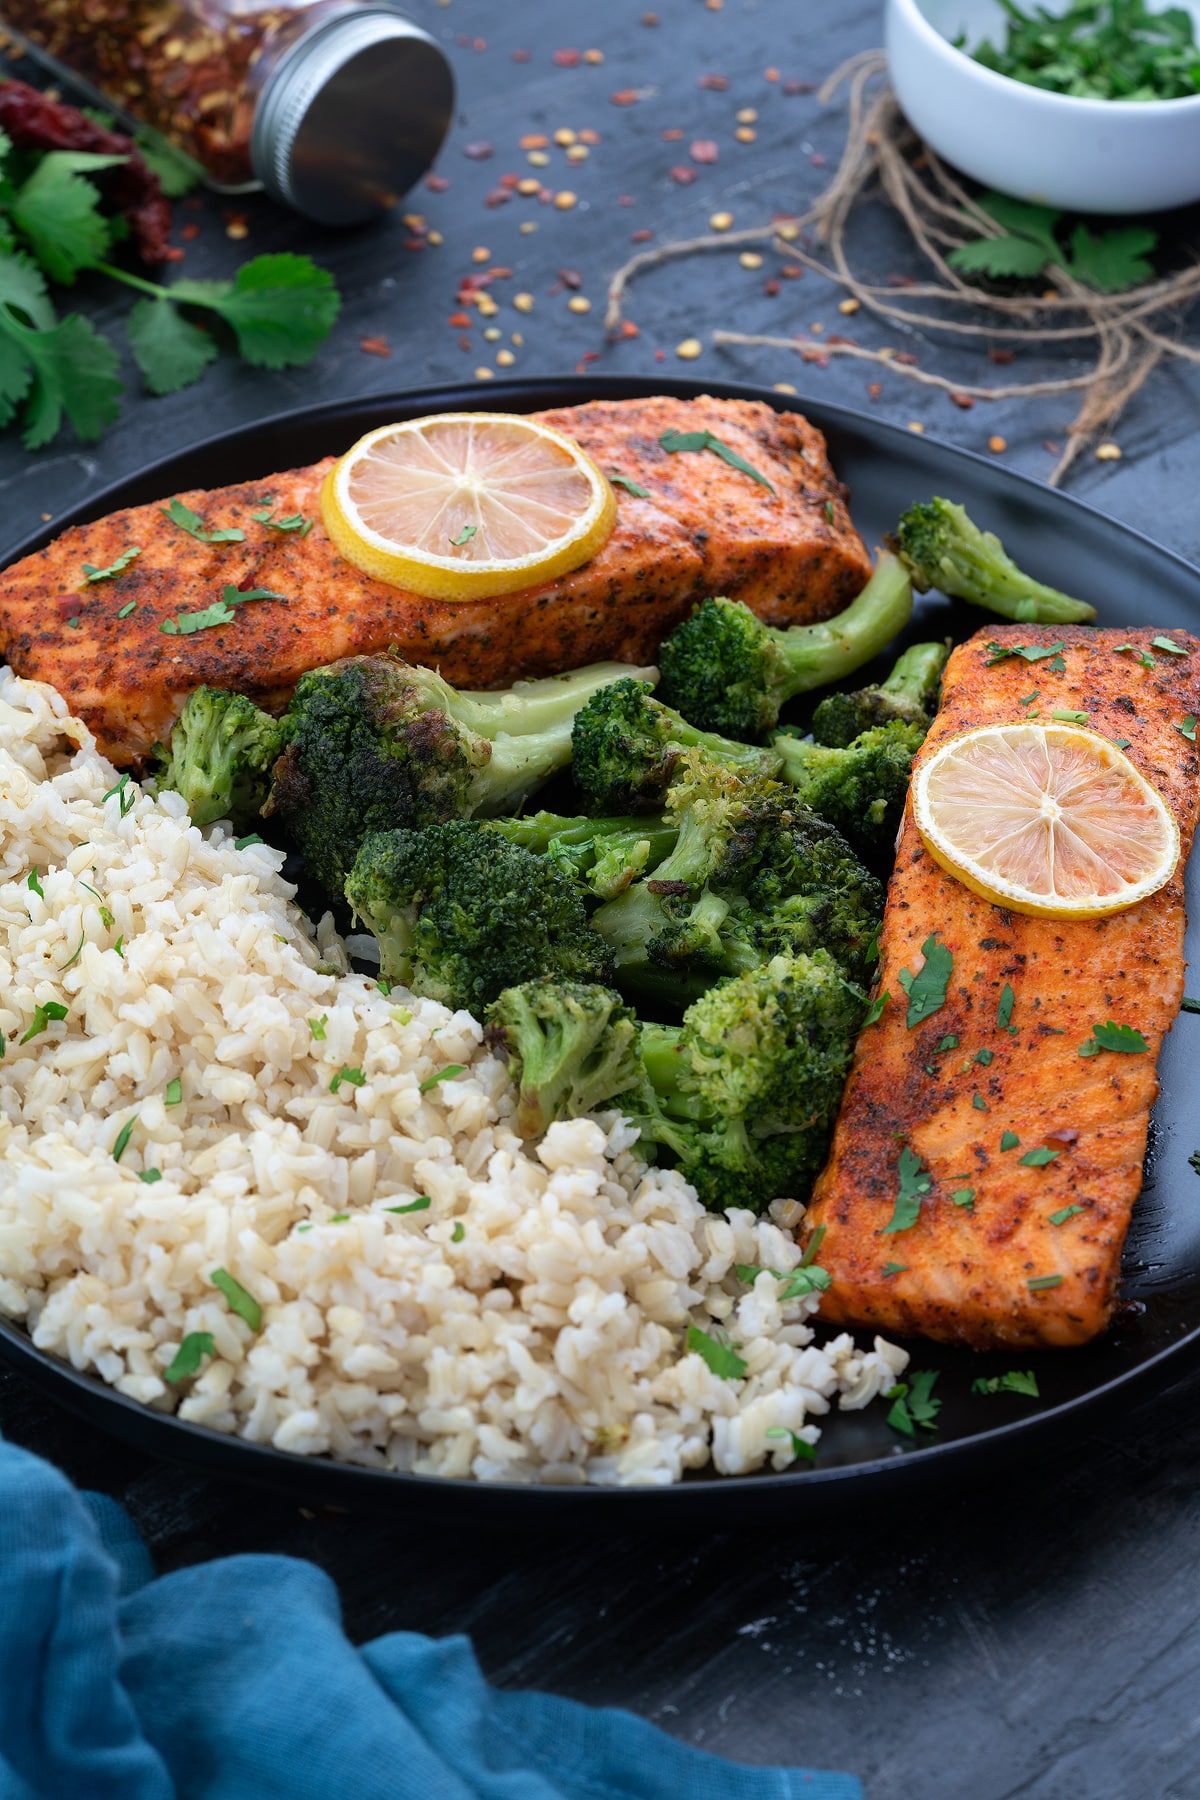 Baked Salmon fillets in a black plate with brown rice and brocolli.